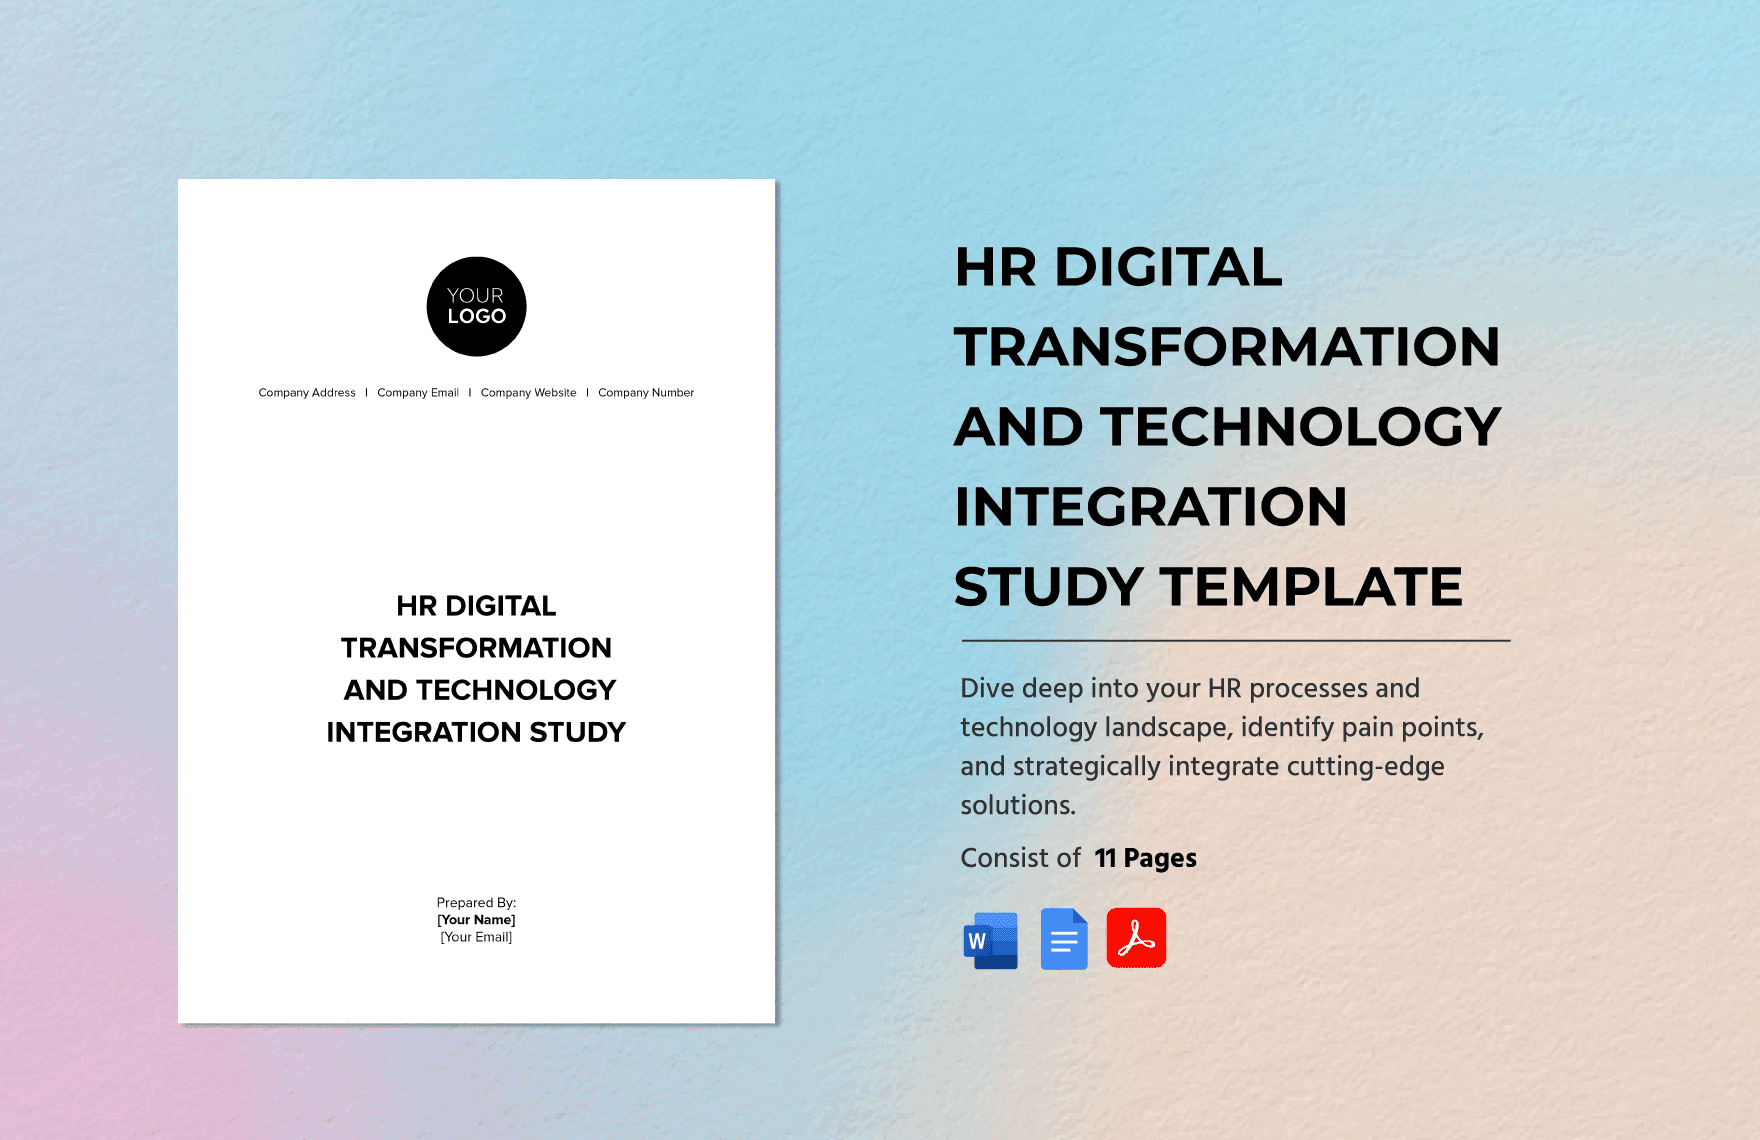 HR Digital Transformation and Technology Integration Study Template